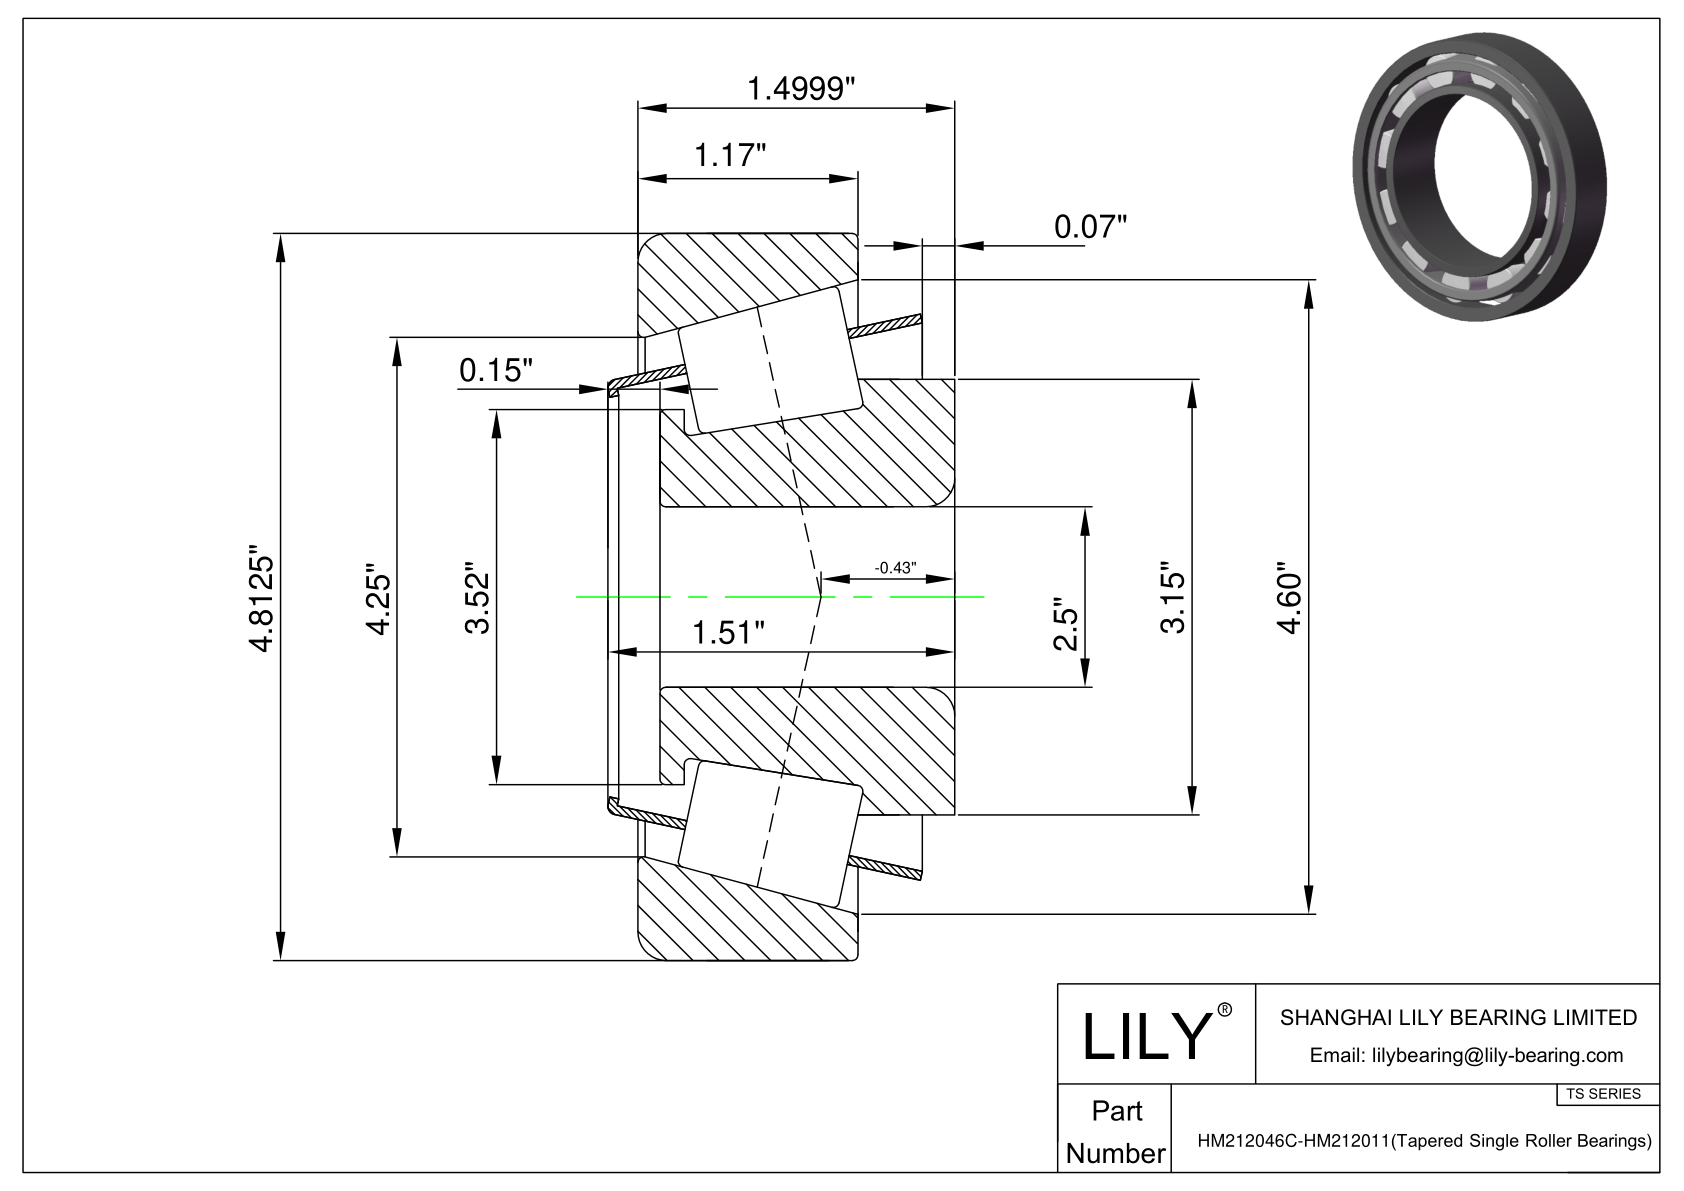 HM212046C-HM212011 TS (Tapered Single Roller Bearings) (Imperial) cad drawing